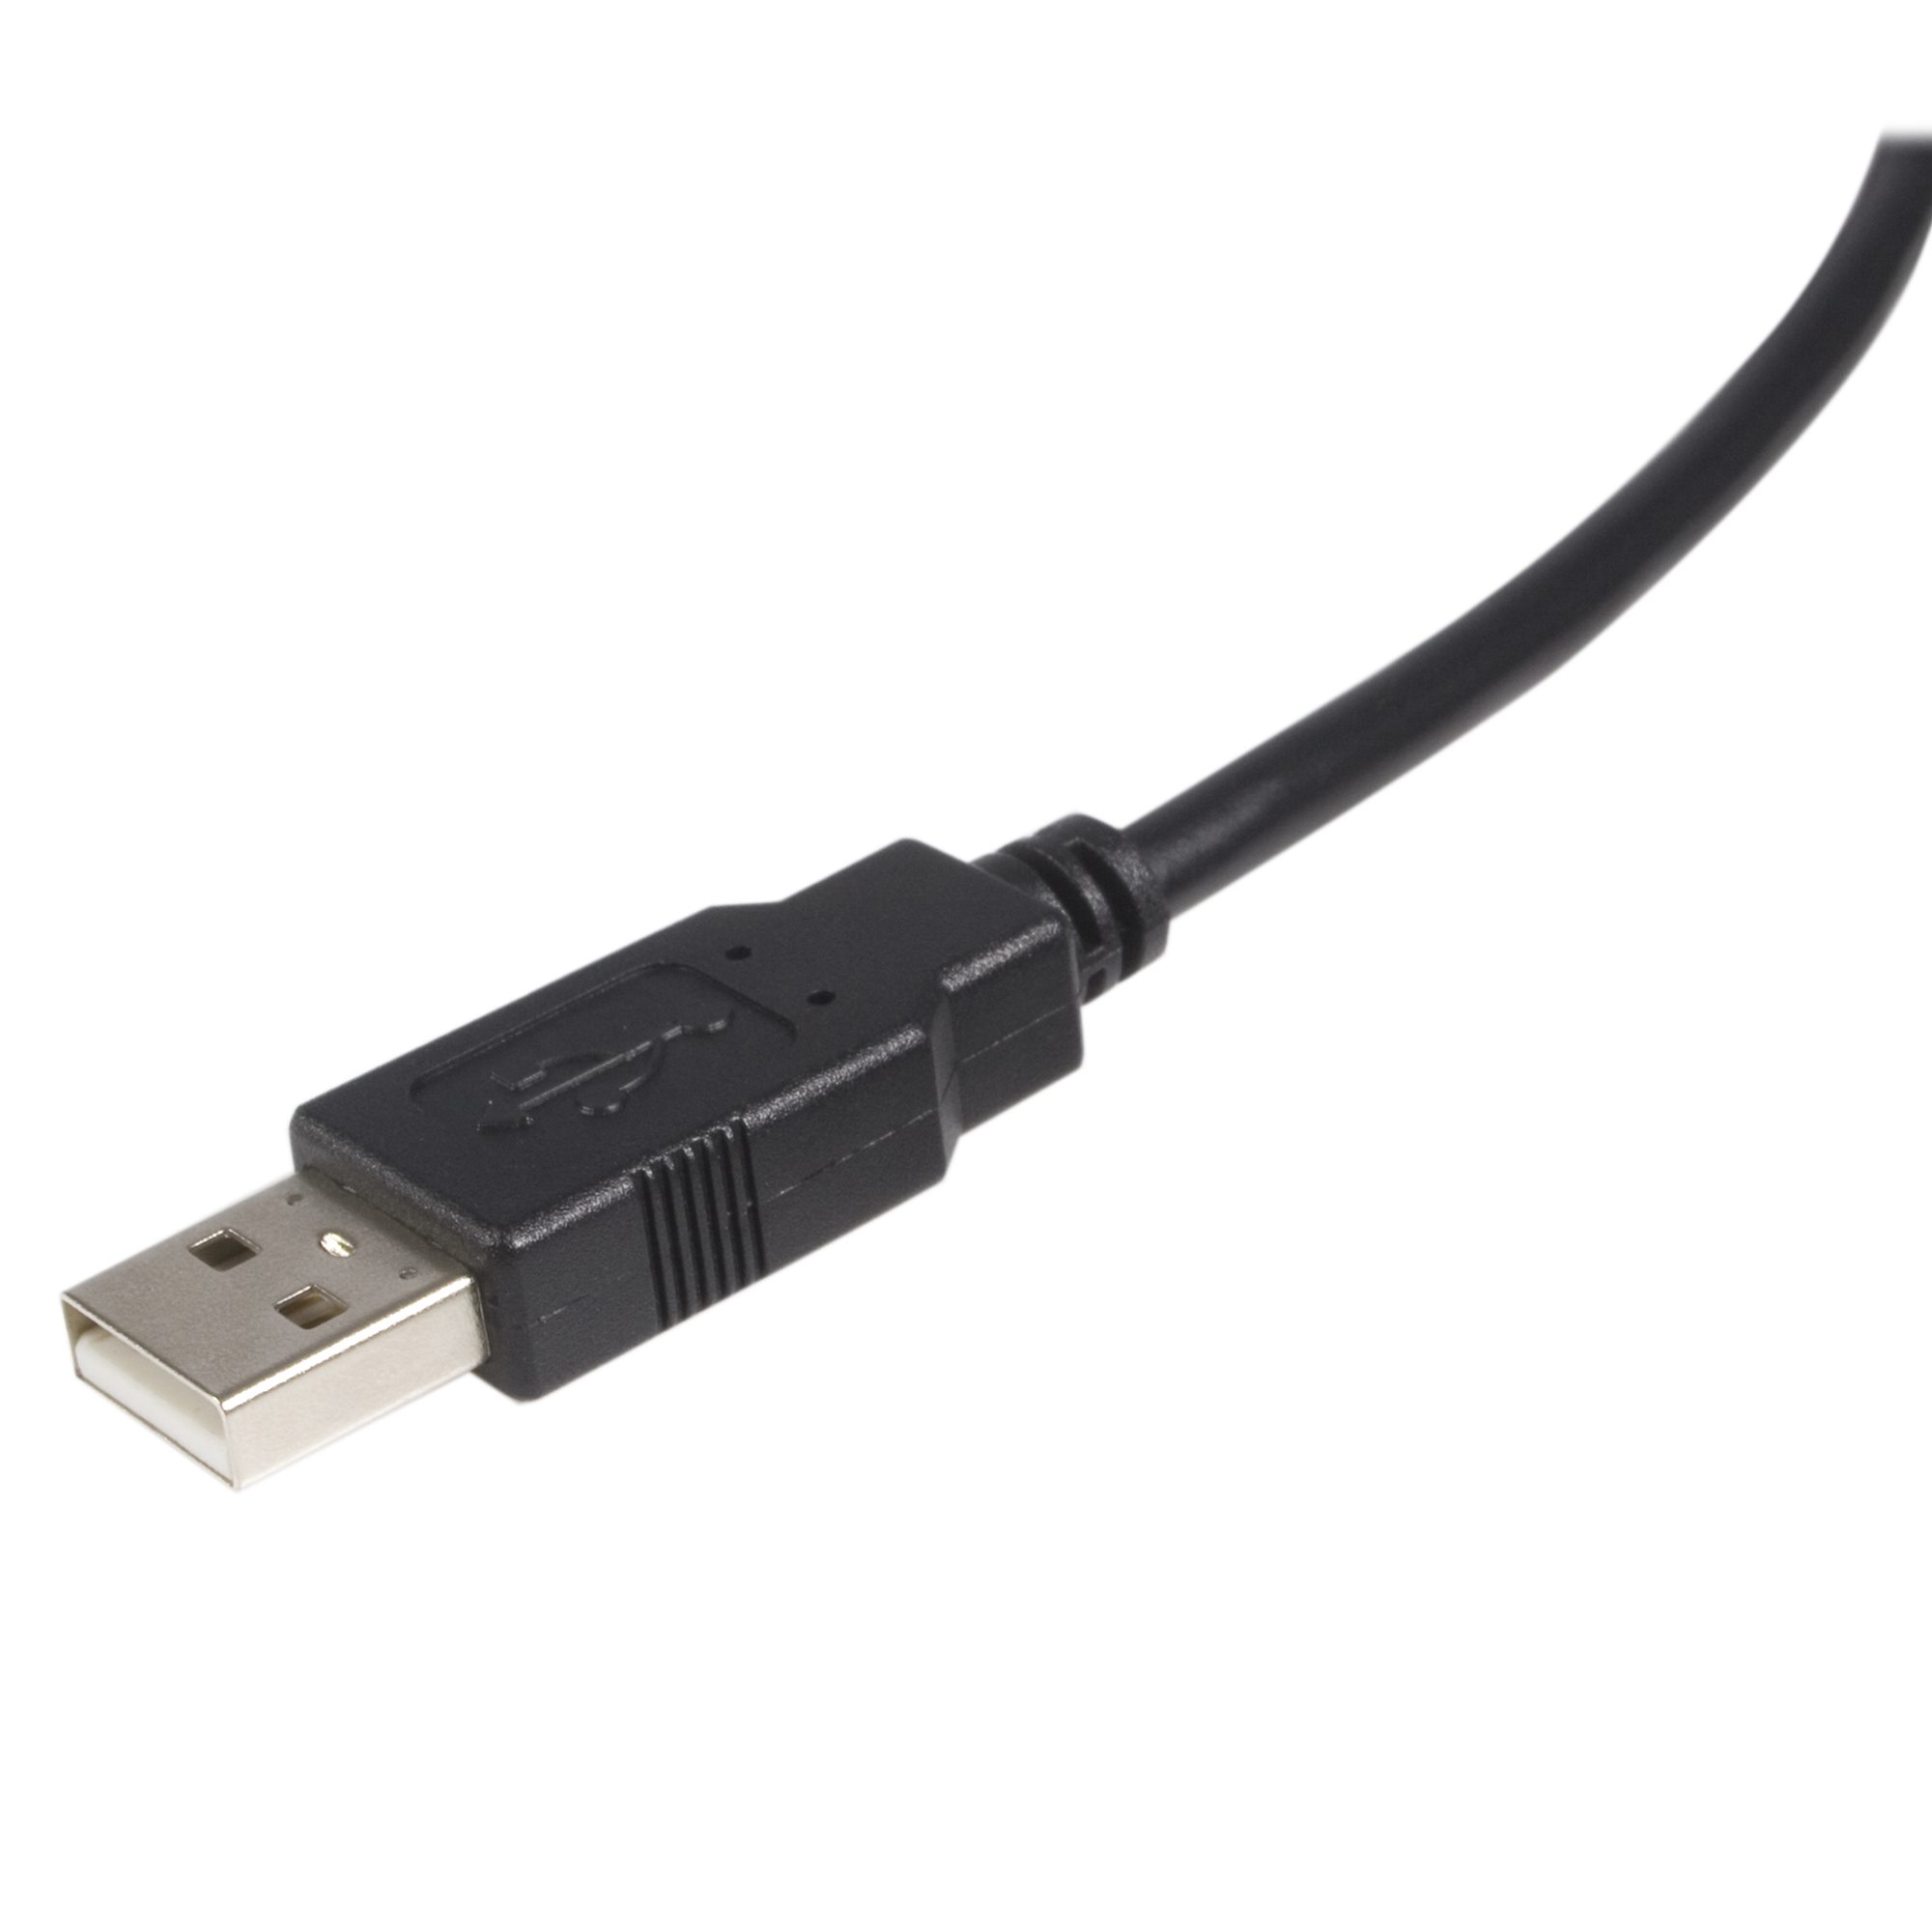 10 ft USB 2.0 Certified A to B Cable M/M - USB 2.0 Cables | Cables